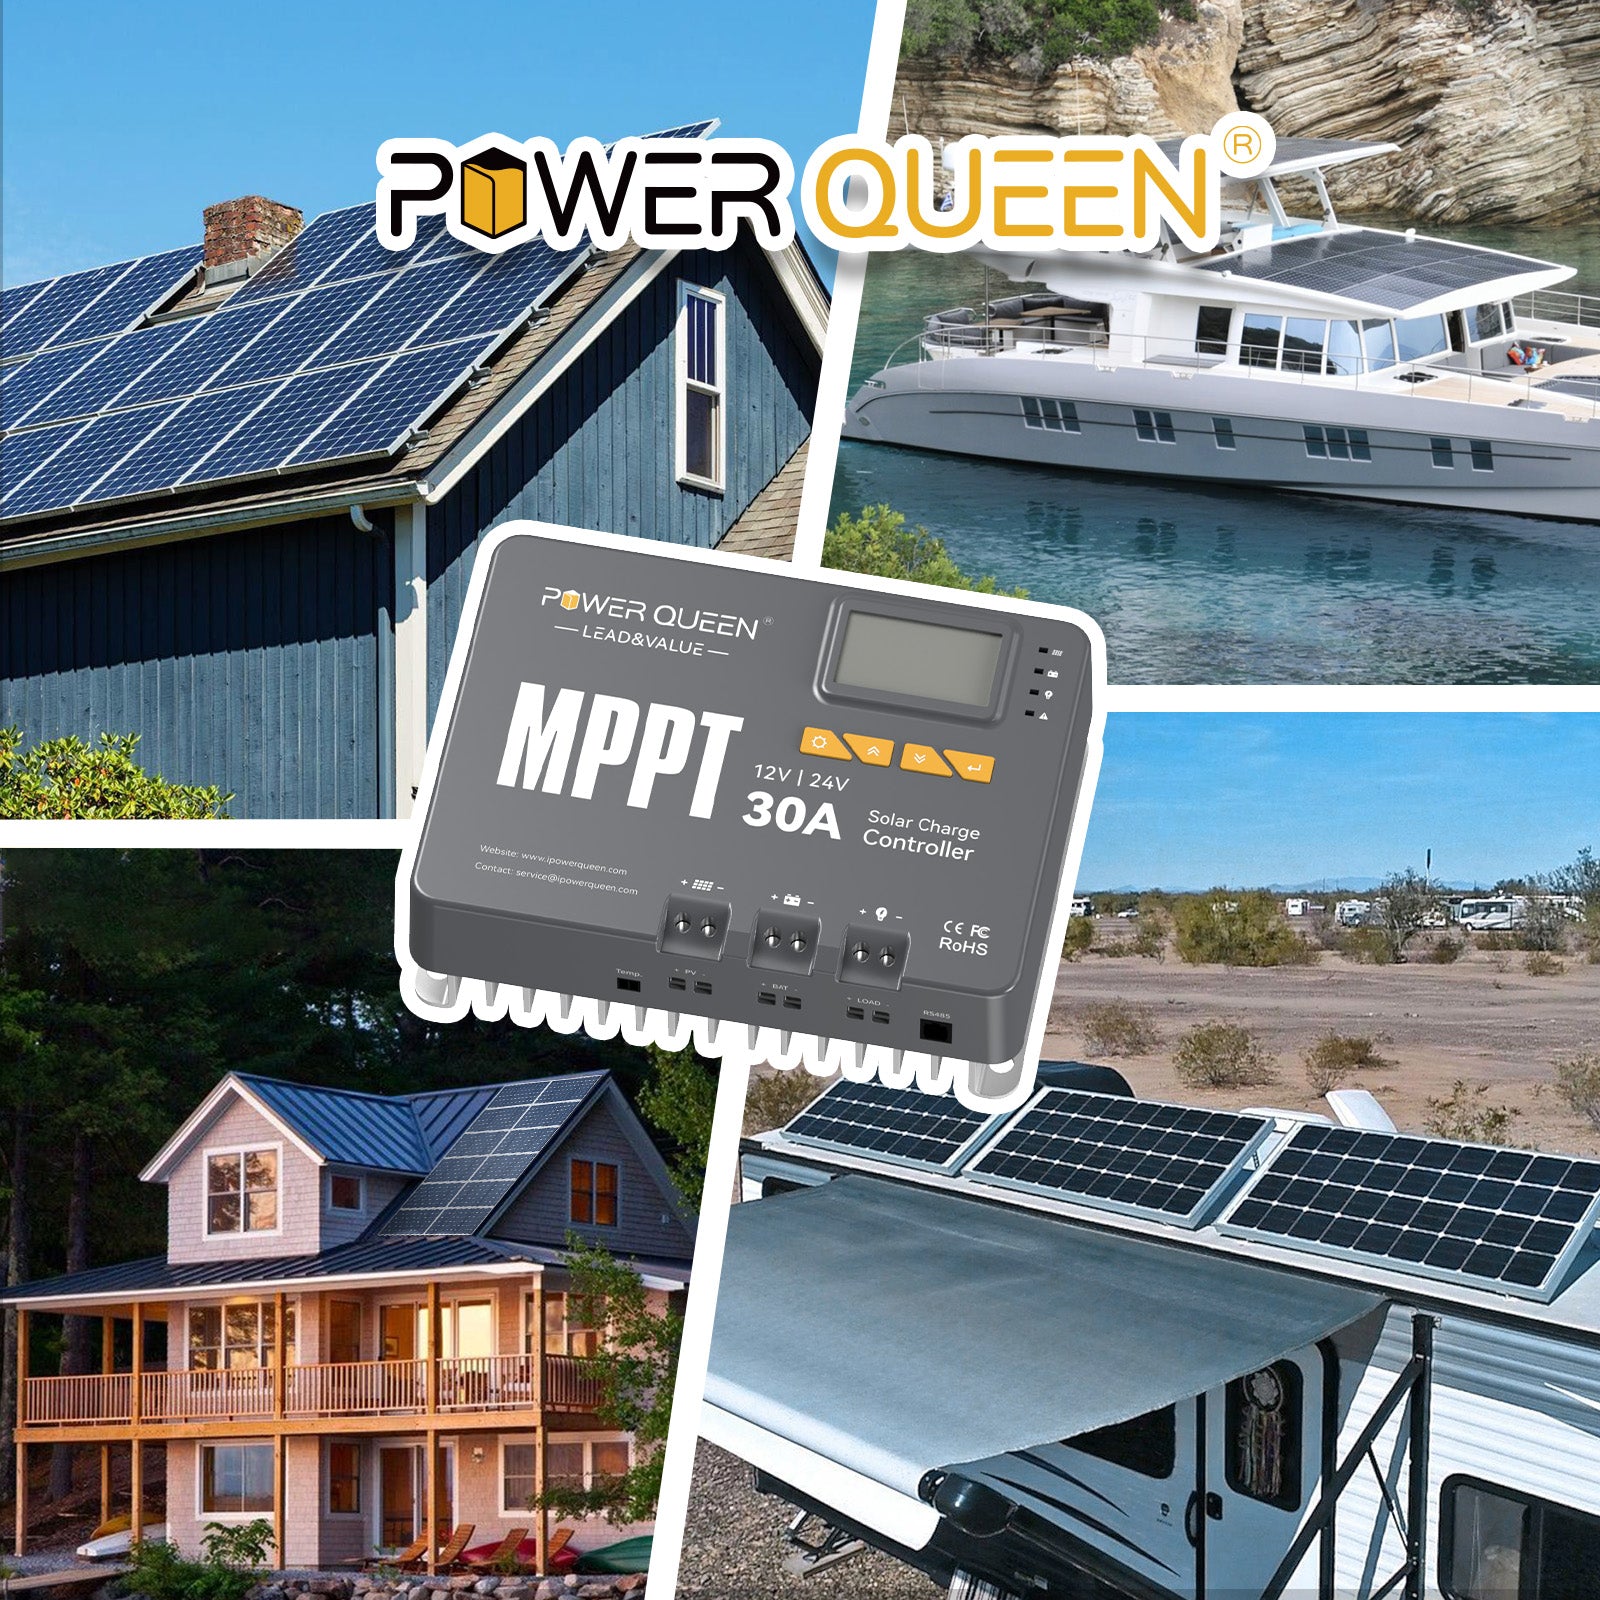 【0% VAT】Power Queen MPPT 12/24V 30A solar charge controller with Bluetooth module